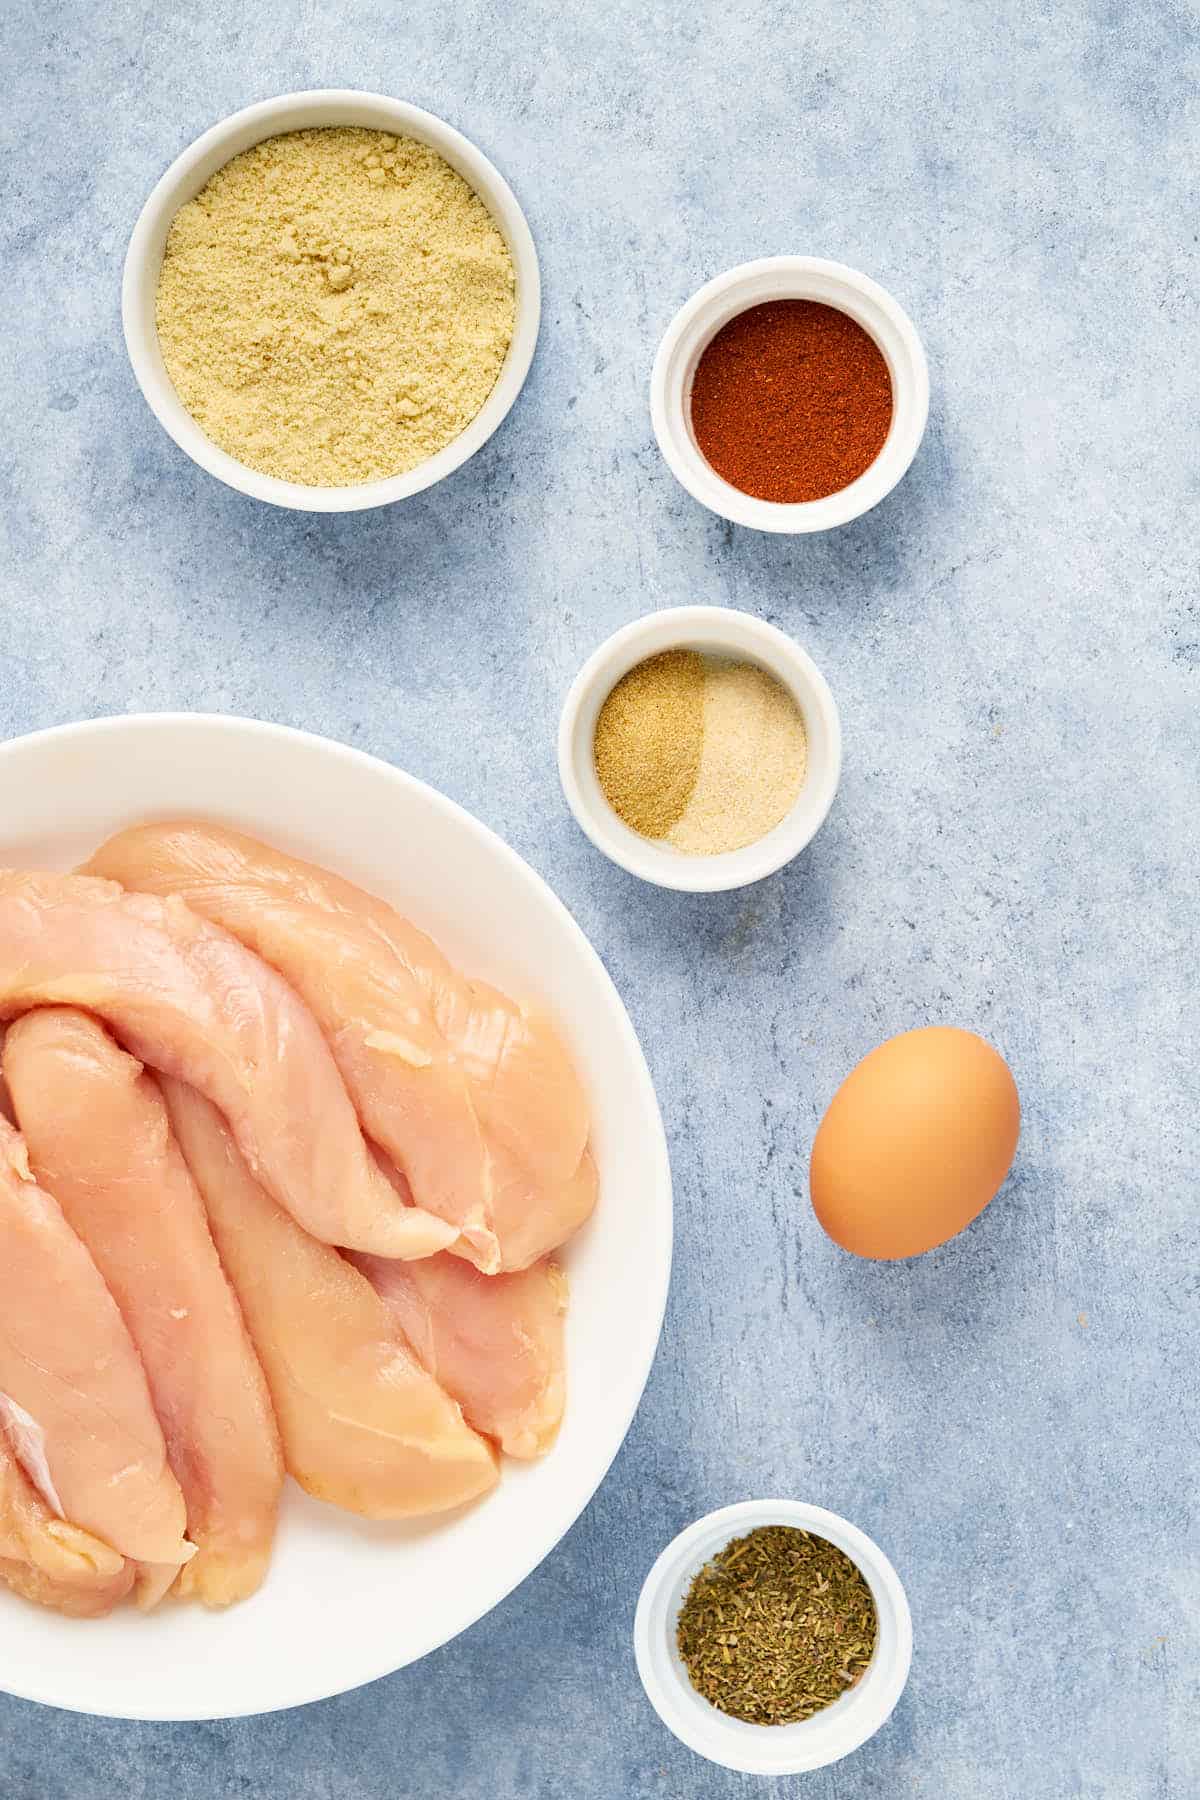 Ingredients to make crusted chicken tenders with almond flour.